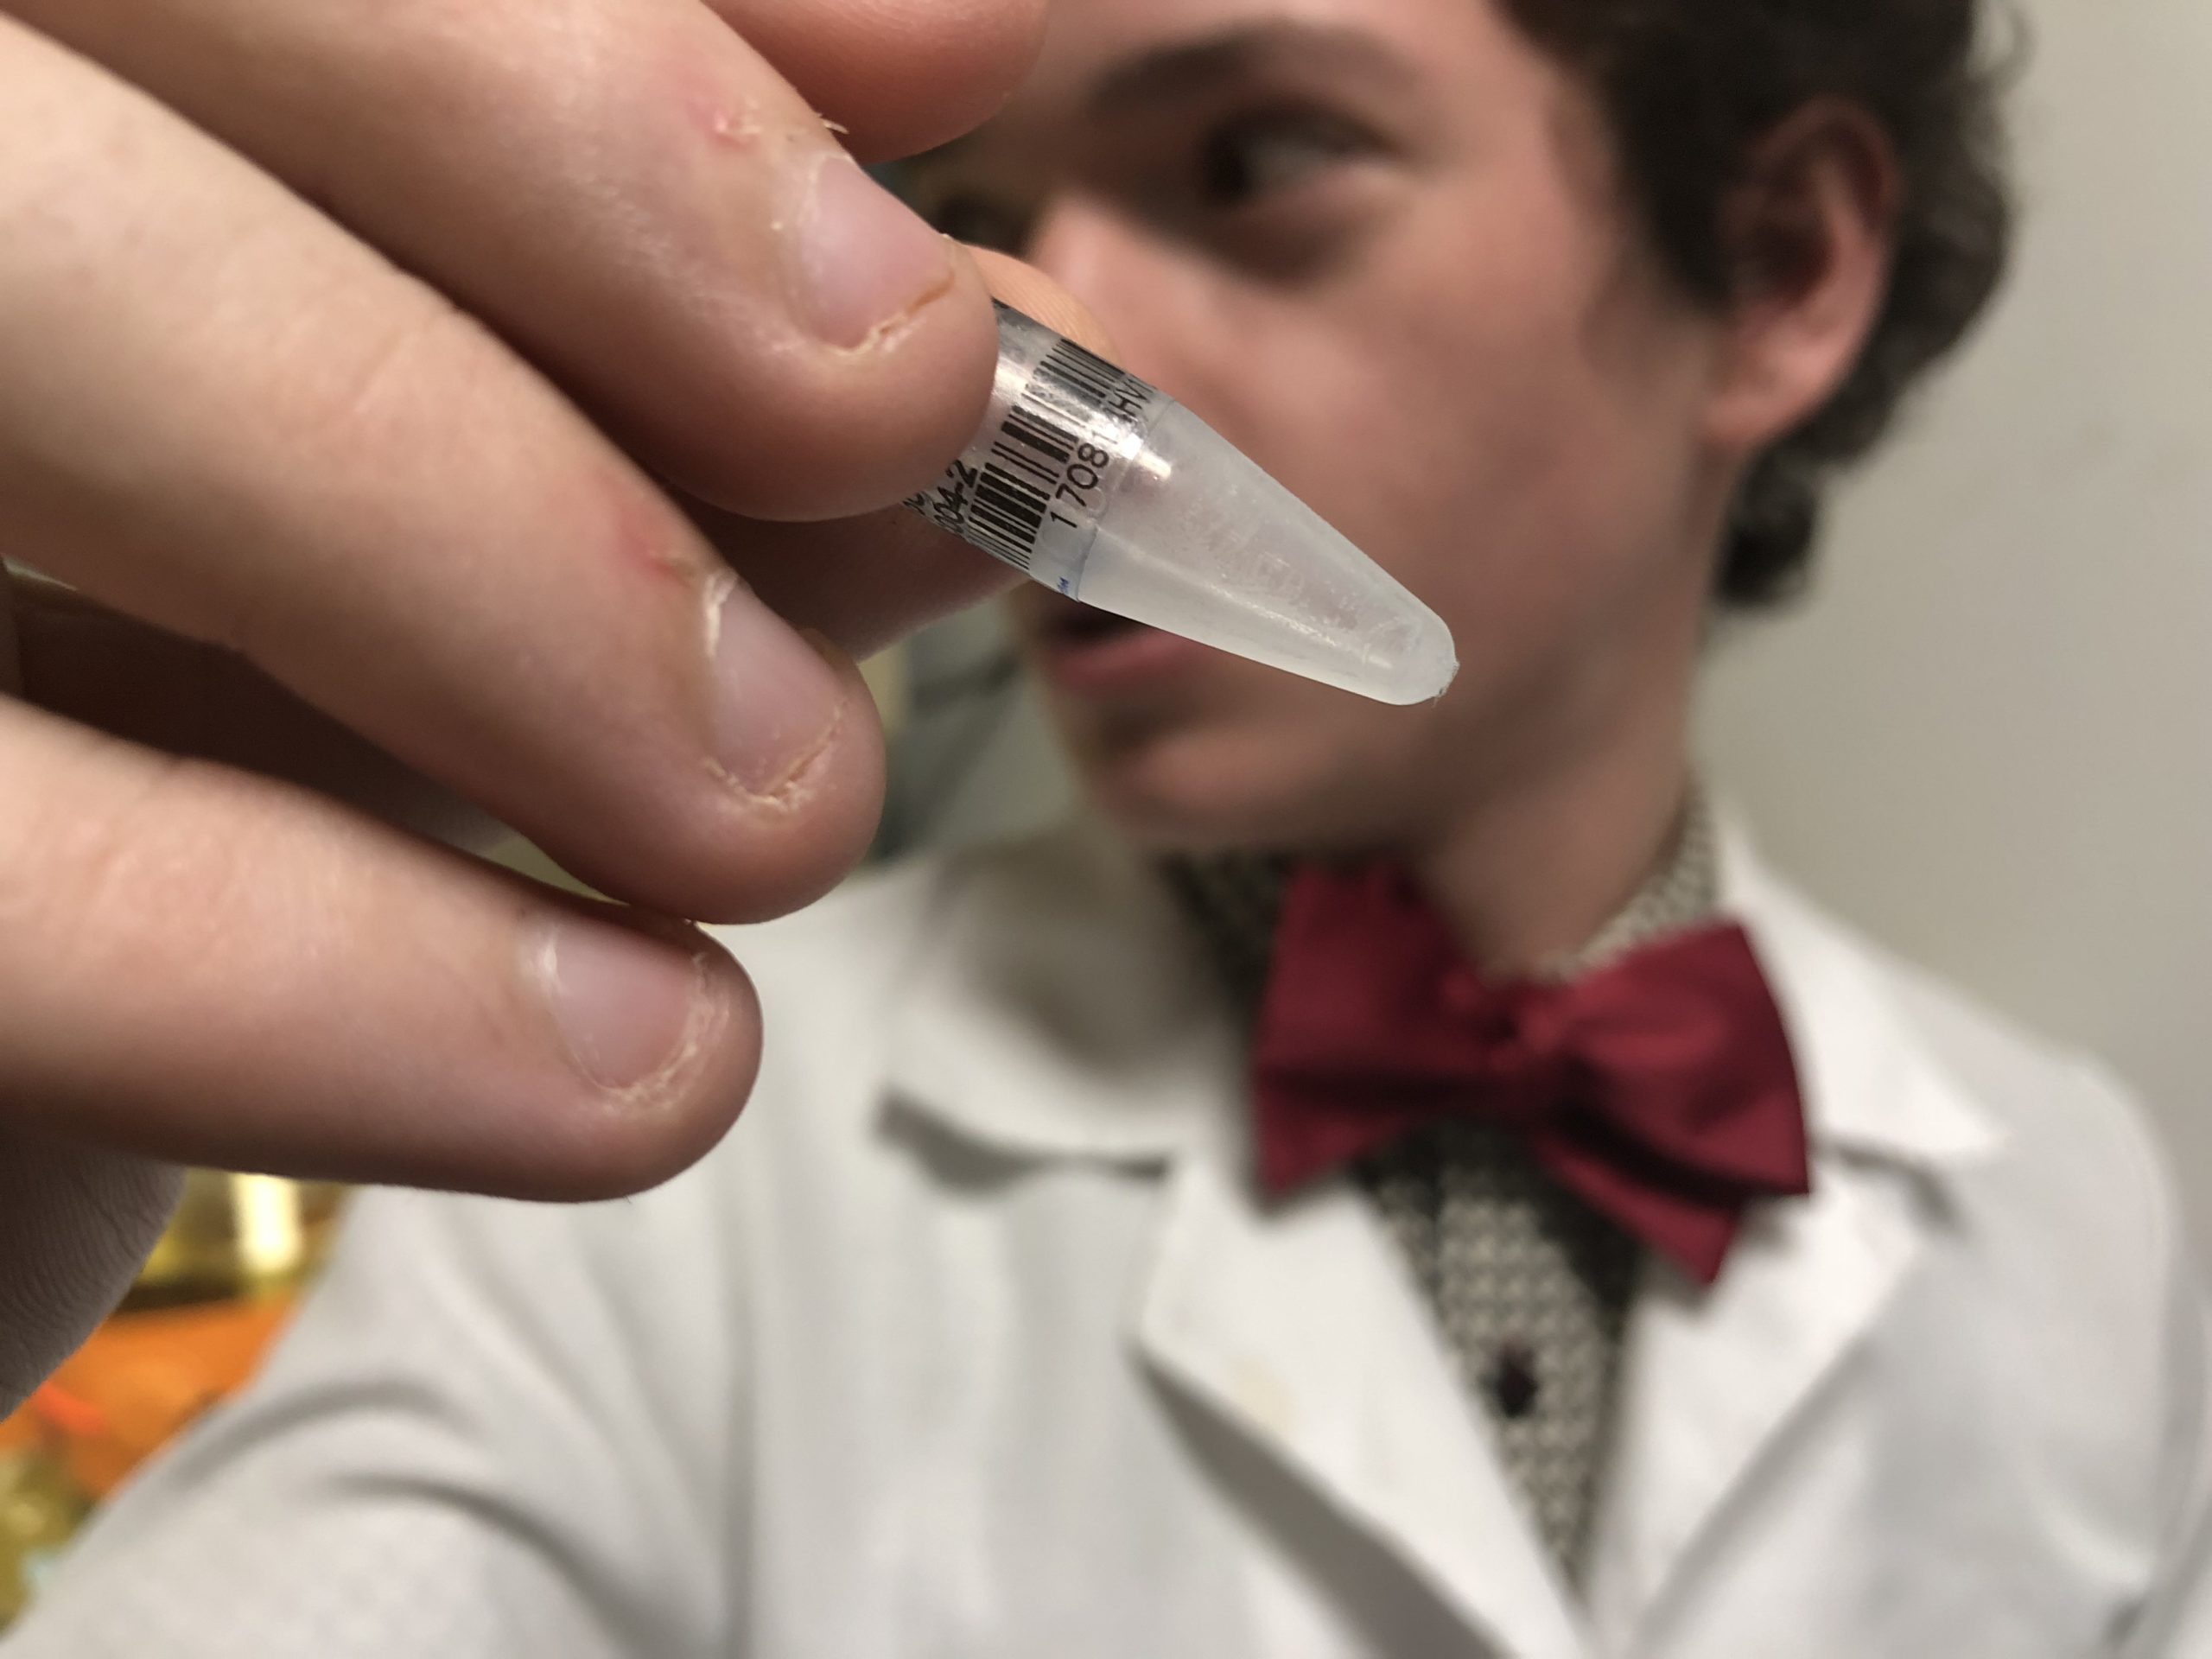 This Rogue Company Wants People To Inject Themselves With Untested Drugs 